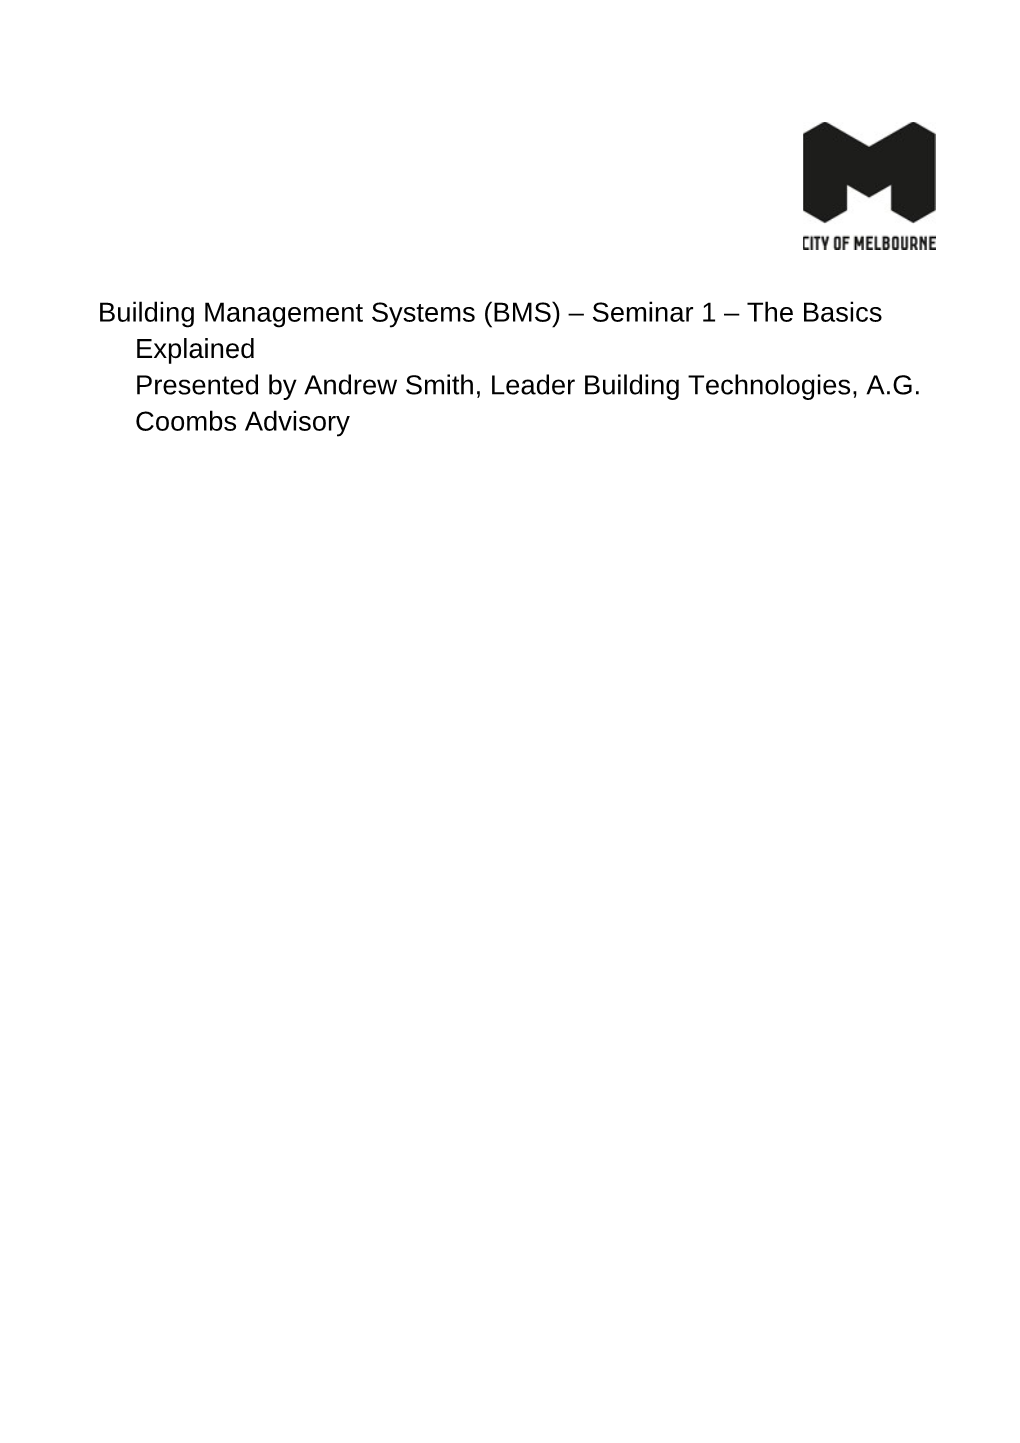 Building Management Systems the Basics Explained